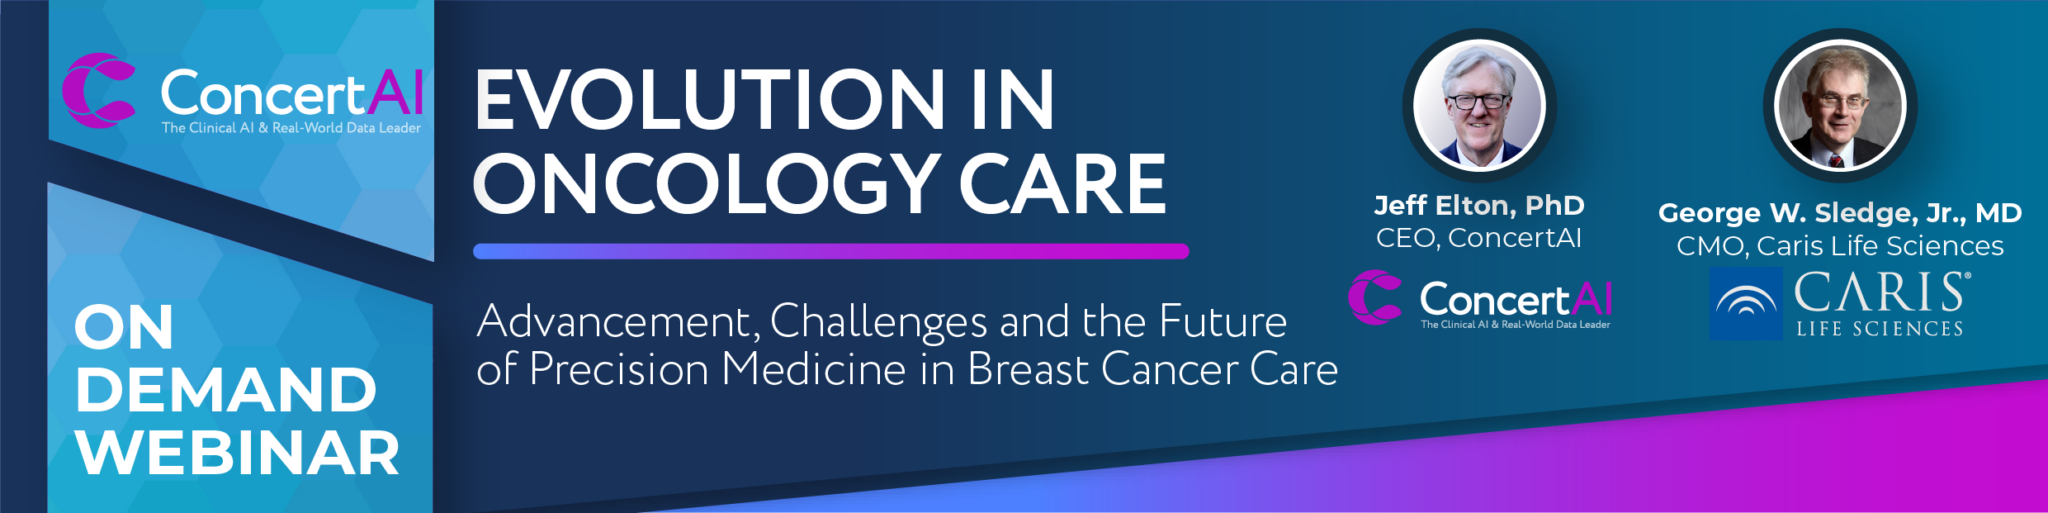 Evolution in Oncology Care feat. George Sledge